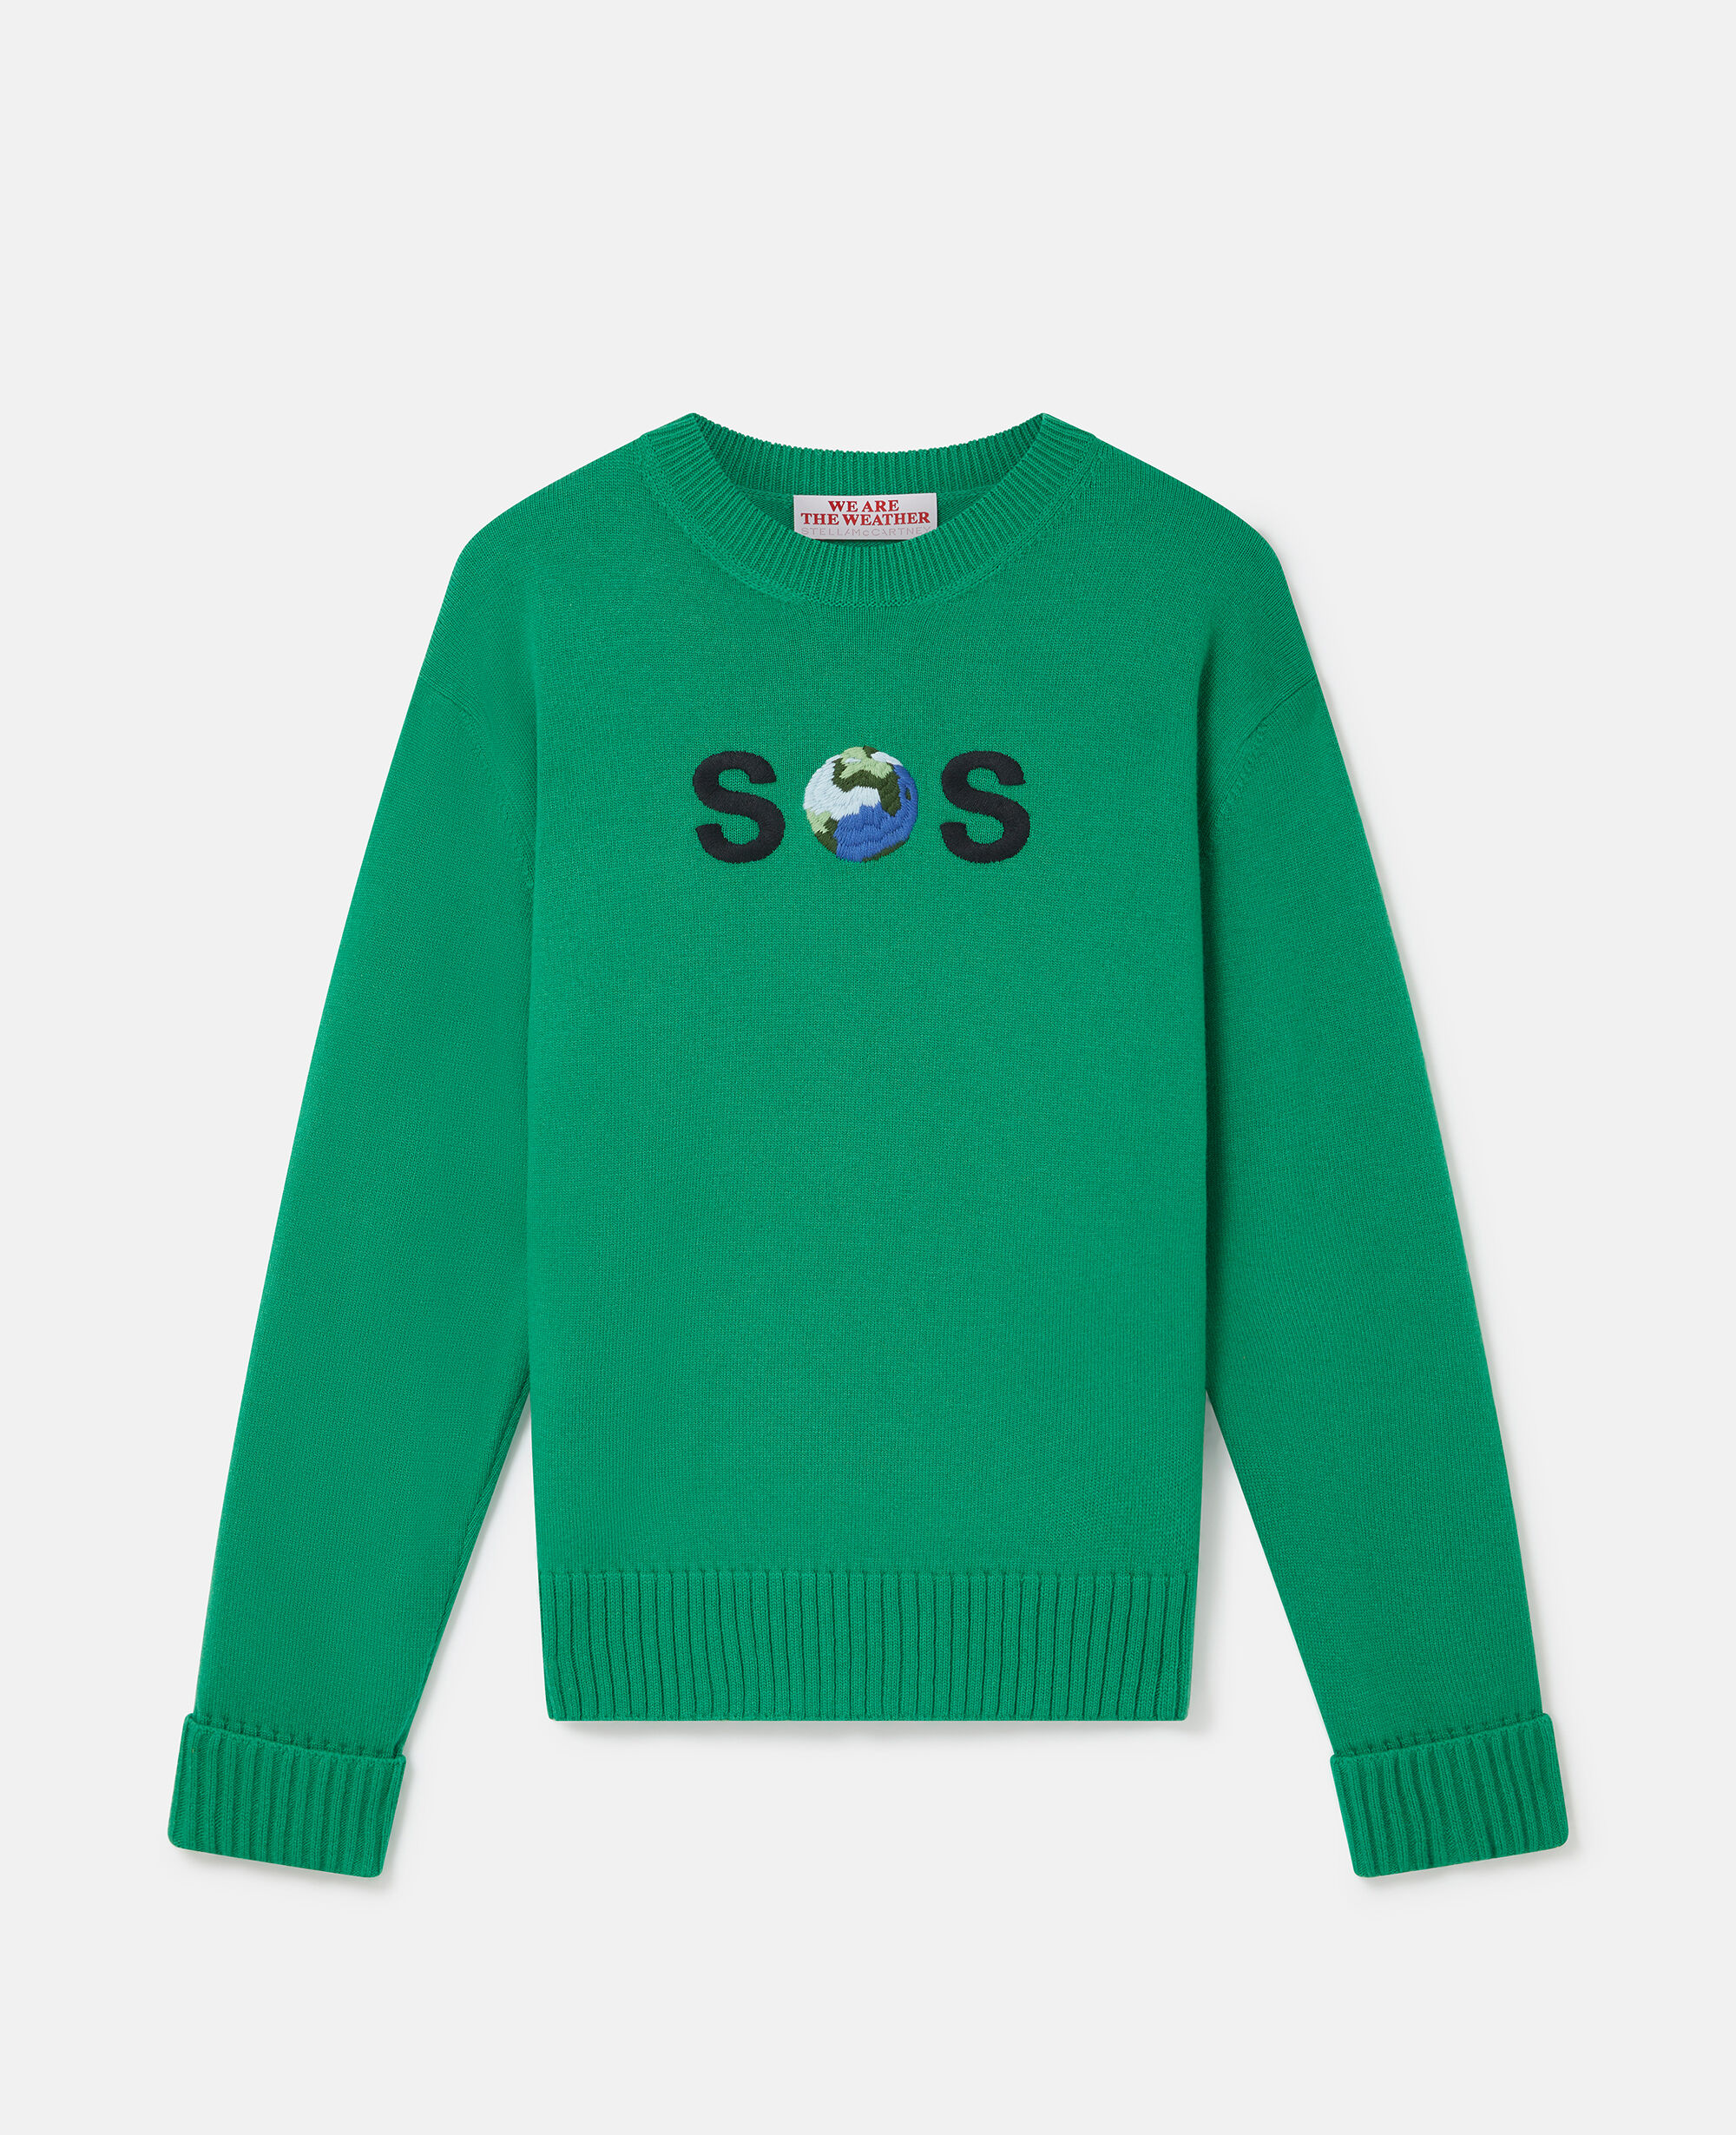 SOS Embroidered Knit Jumper